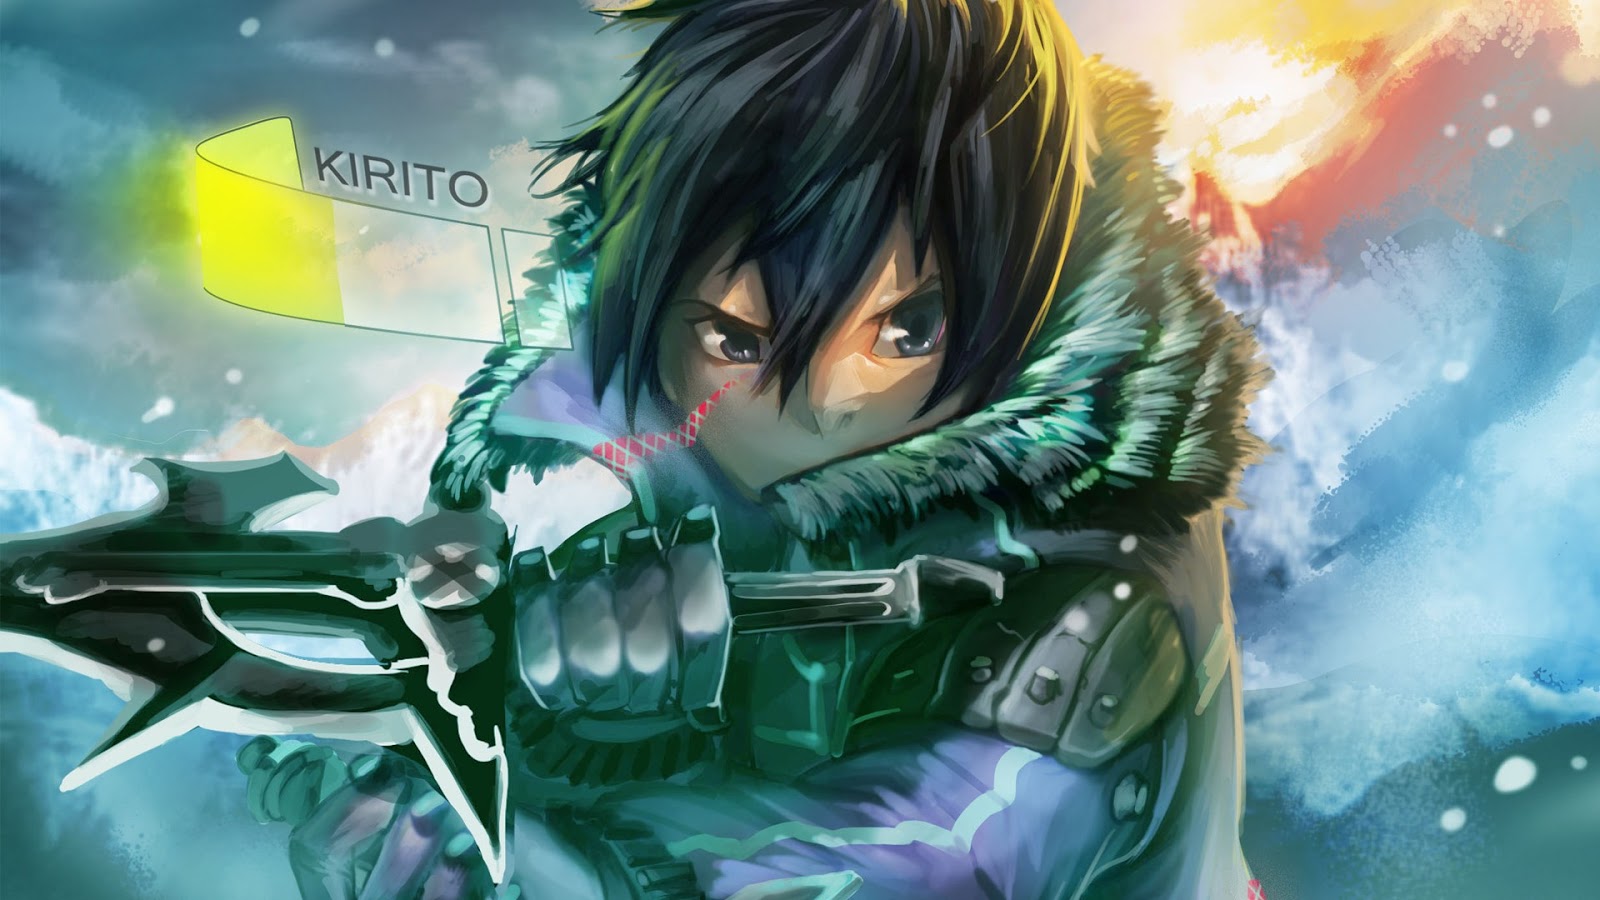 Kirito 16 Fan Arts and Wallpapers Your daily Anime Wallpaper and Fan 1600x900